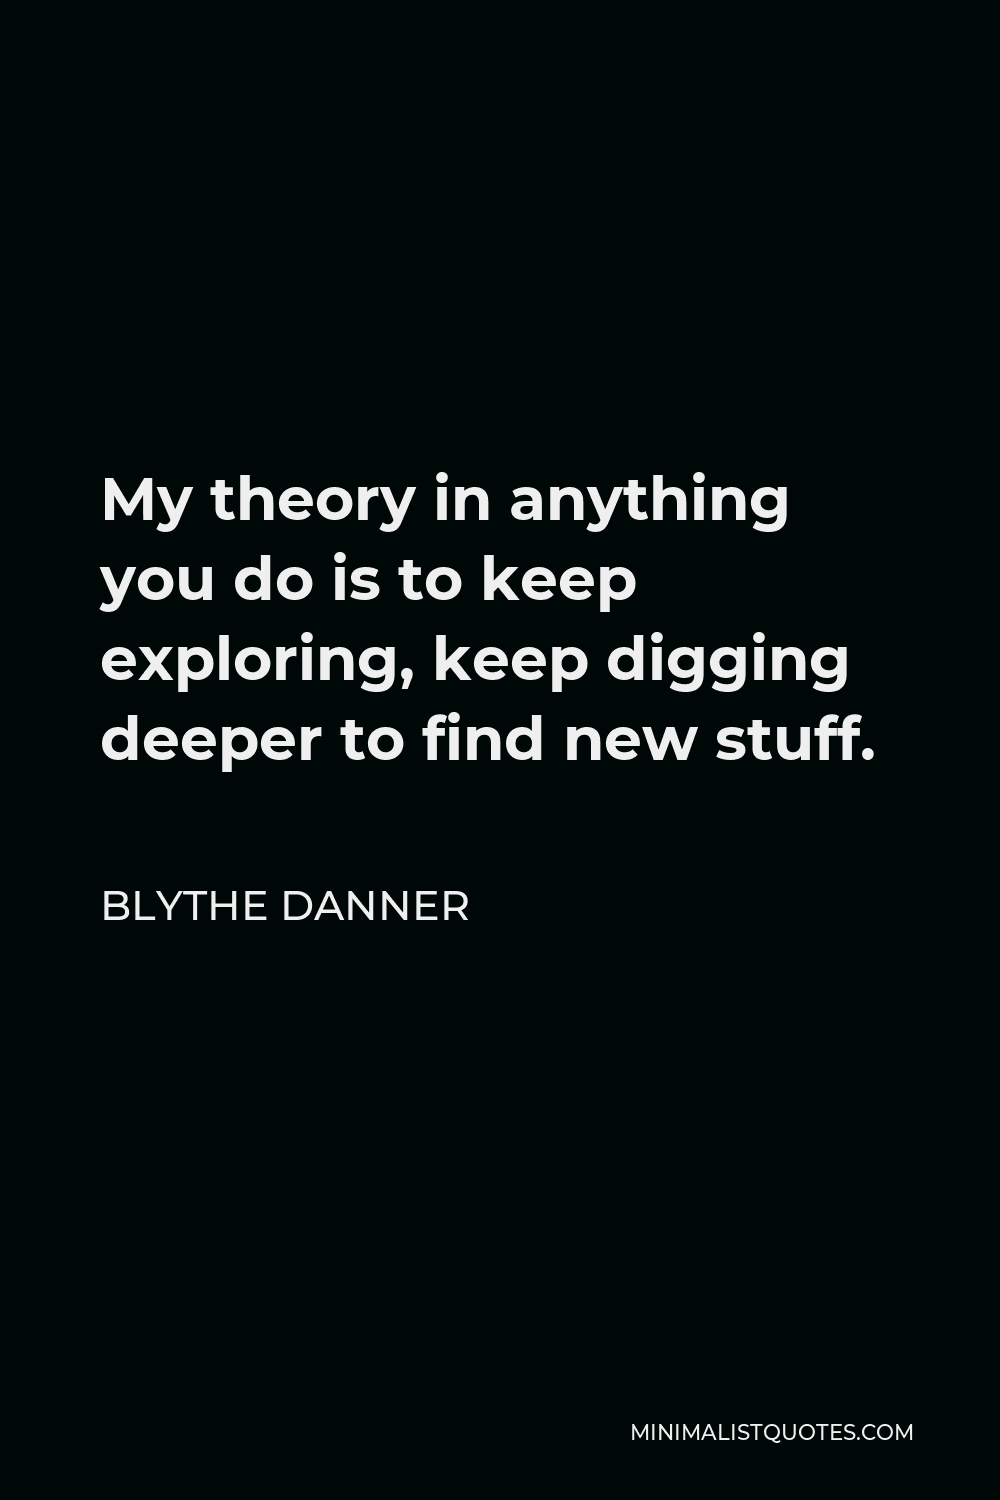 Blythe Danner Quote - My theory in anything you do is to keep exploring, keep digging deeper to find new stuff.